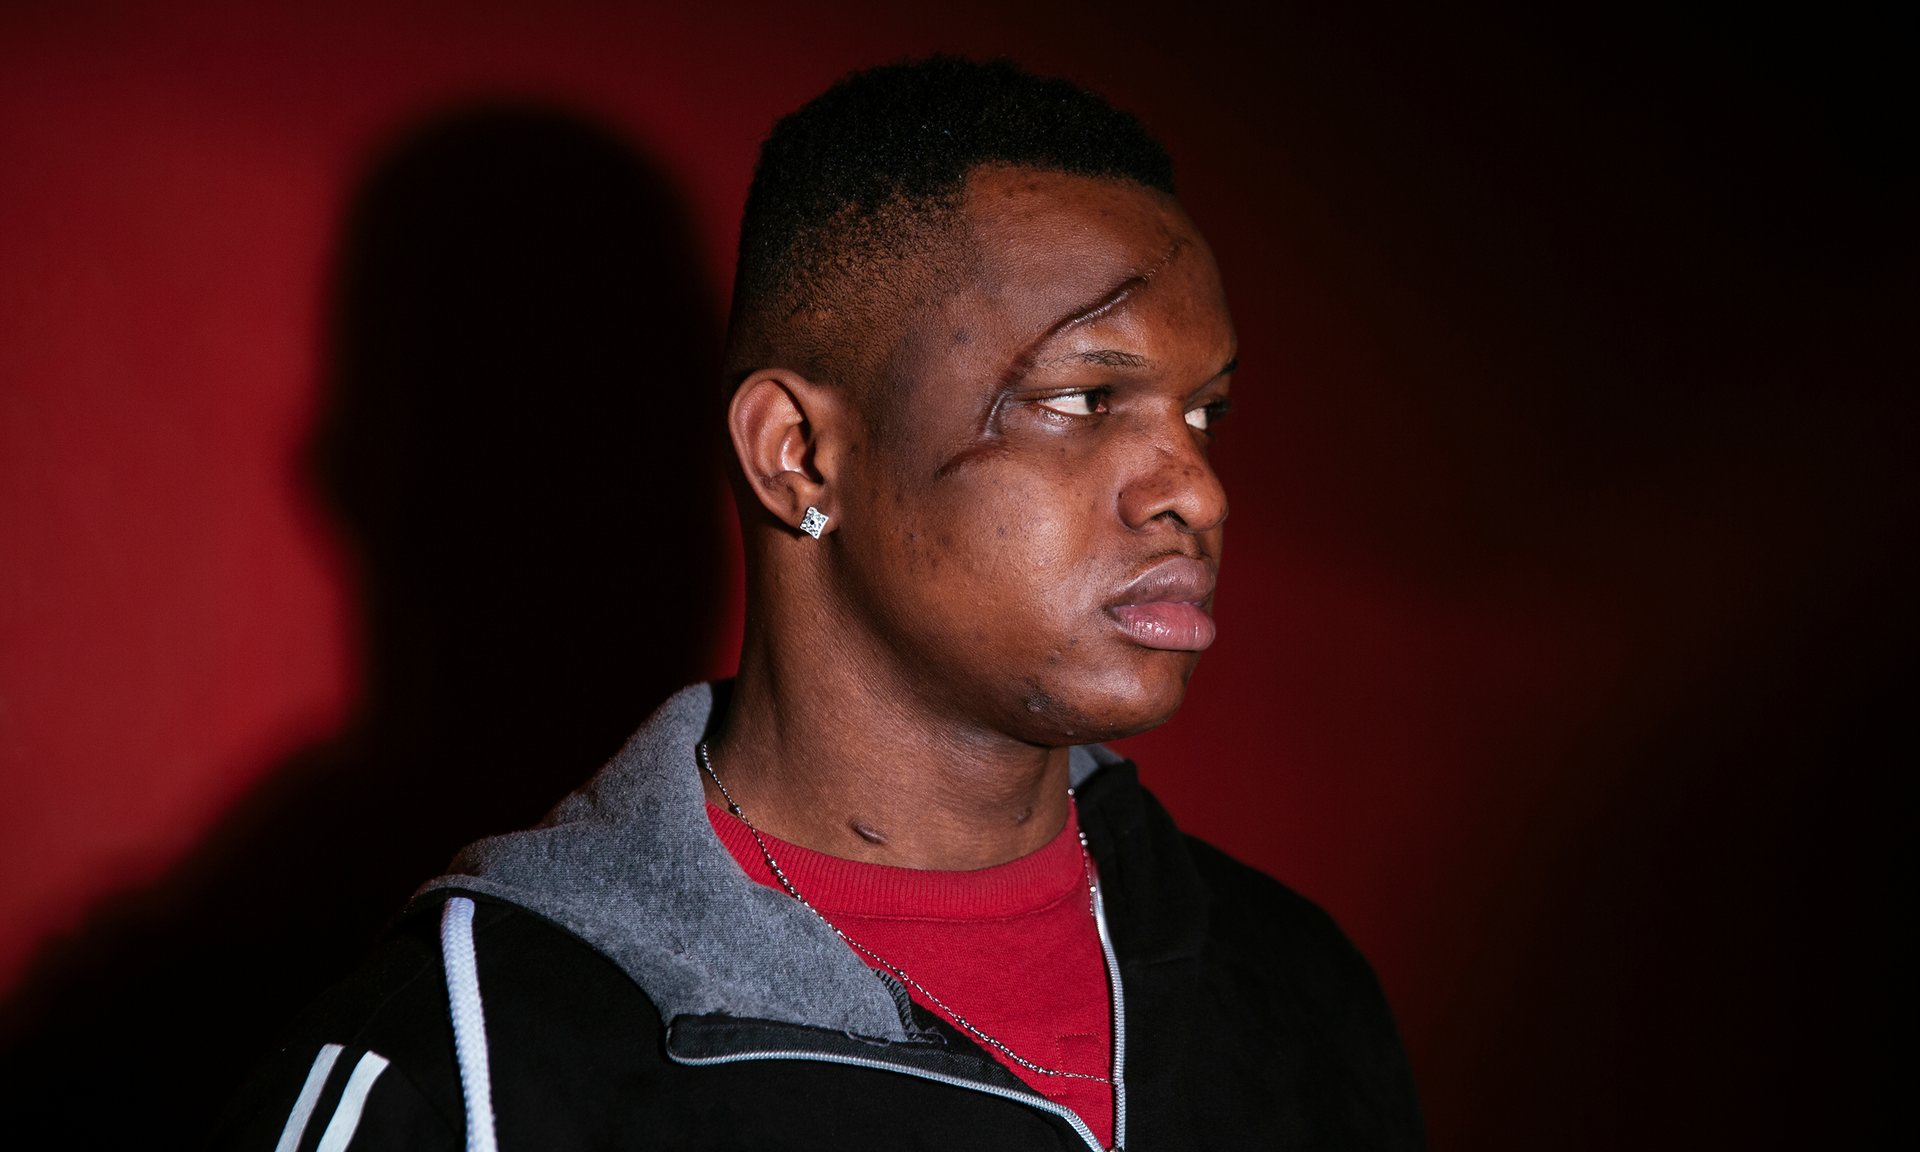 Emmanuel, a 25 year-old Nigerian living in Palermo, claims his face was scarred with a machete by members of the Black Axe clan. Photograph: Francesco Bellina